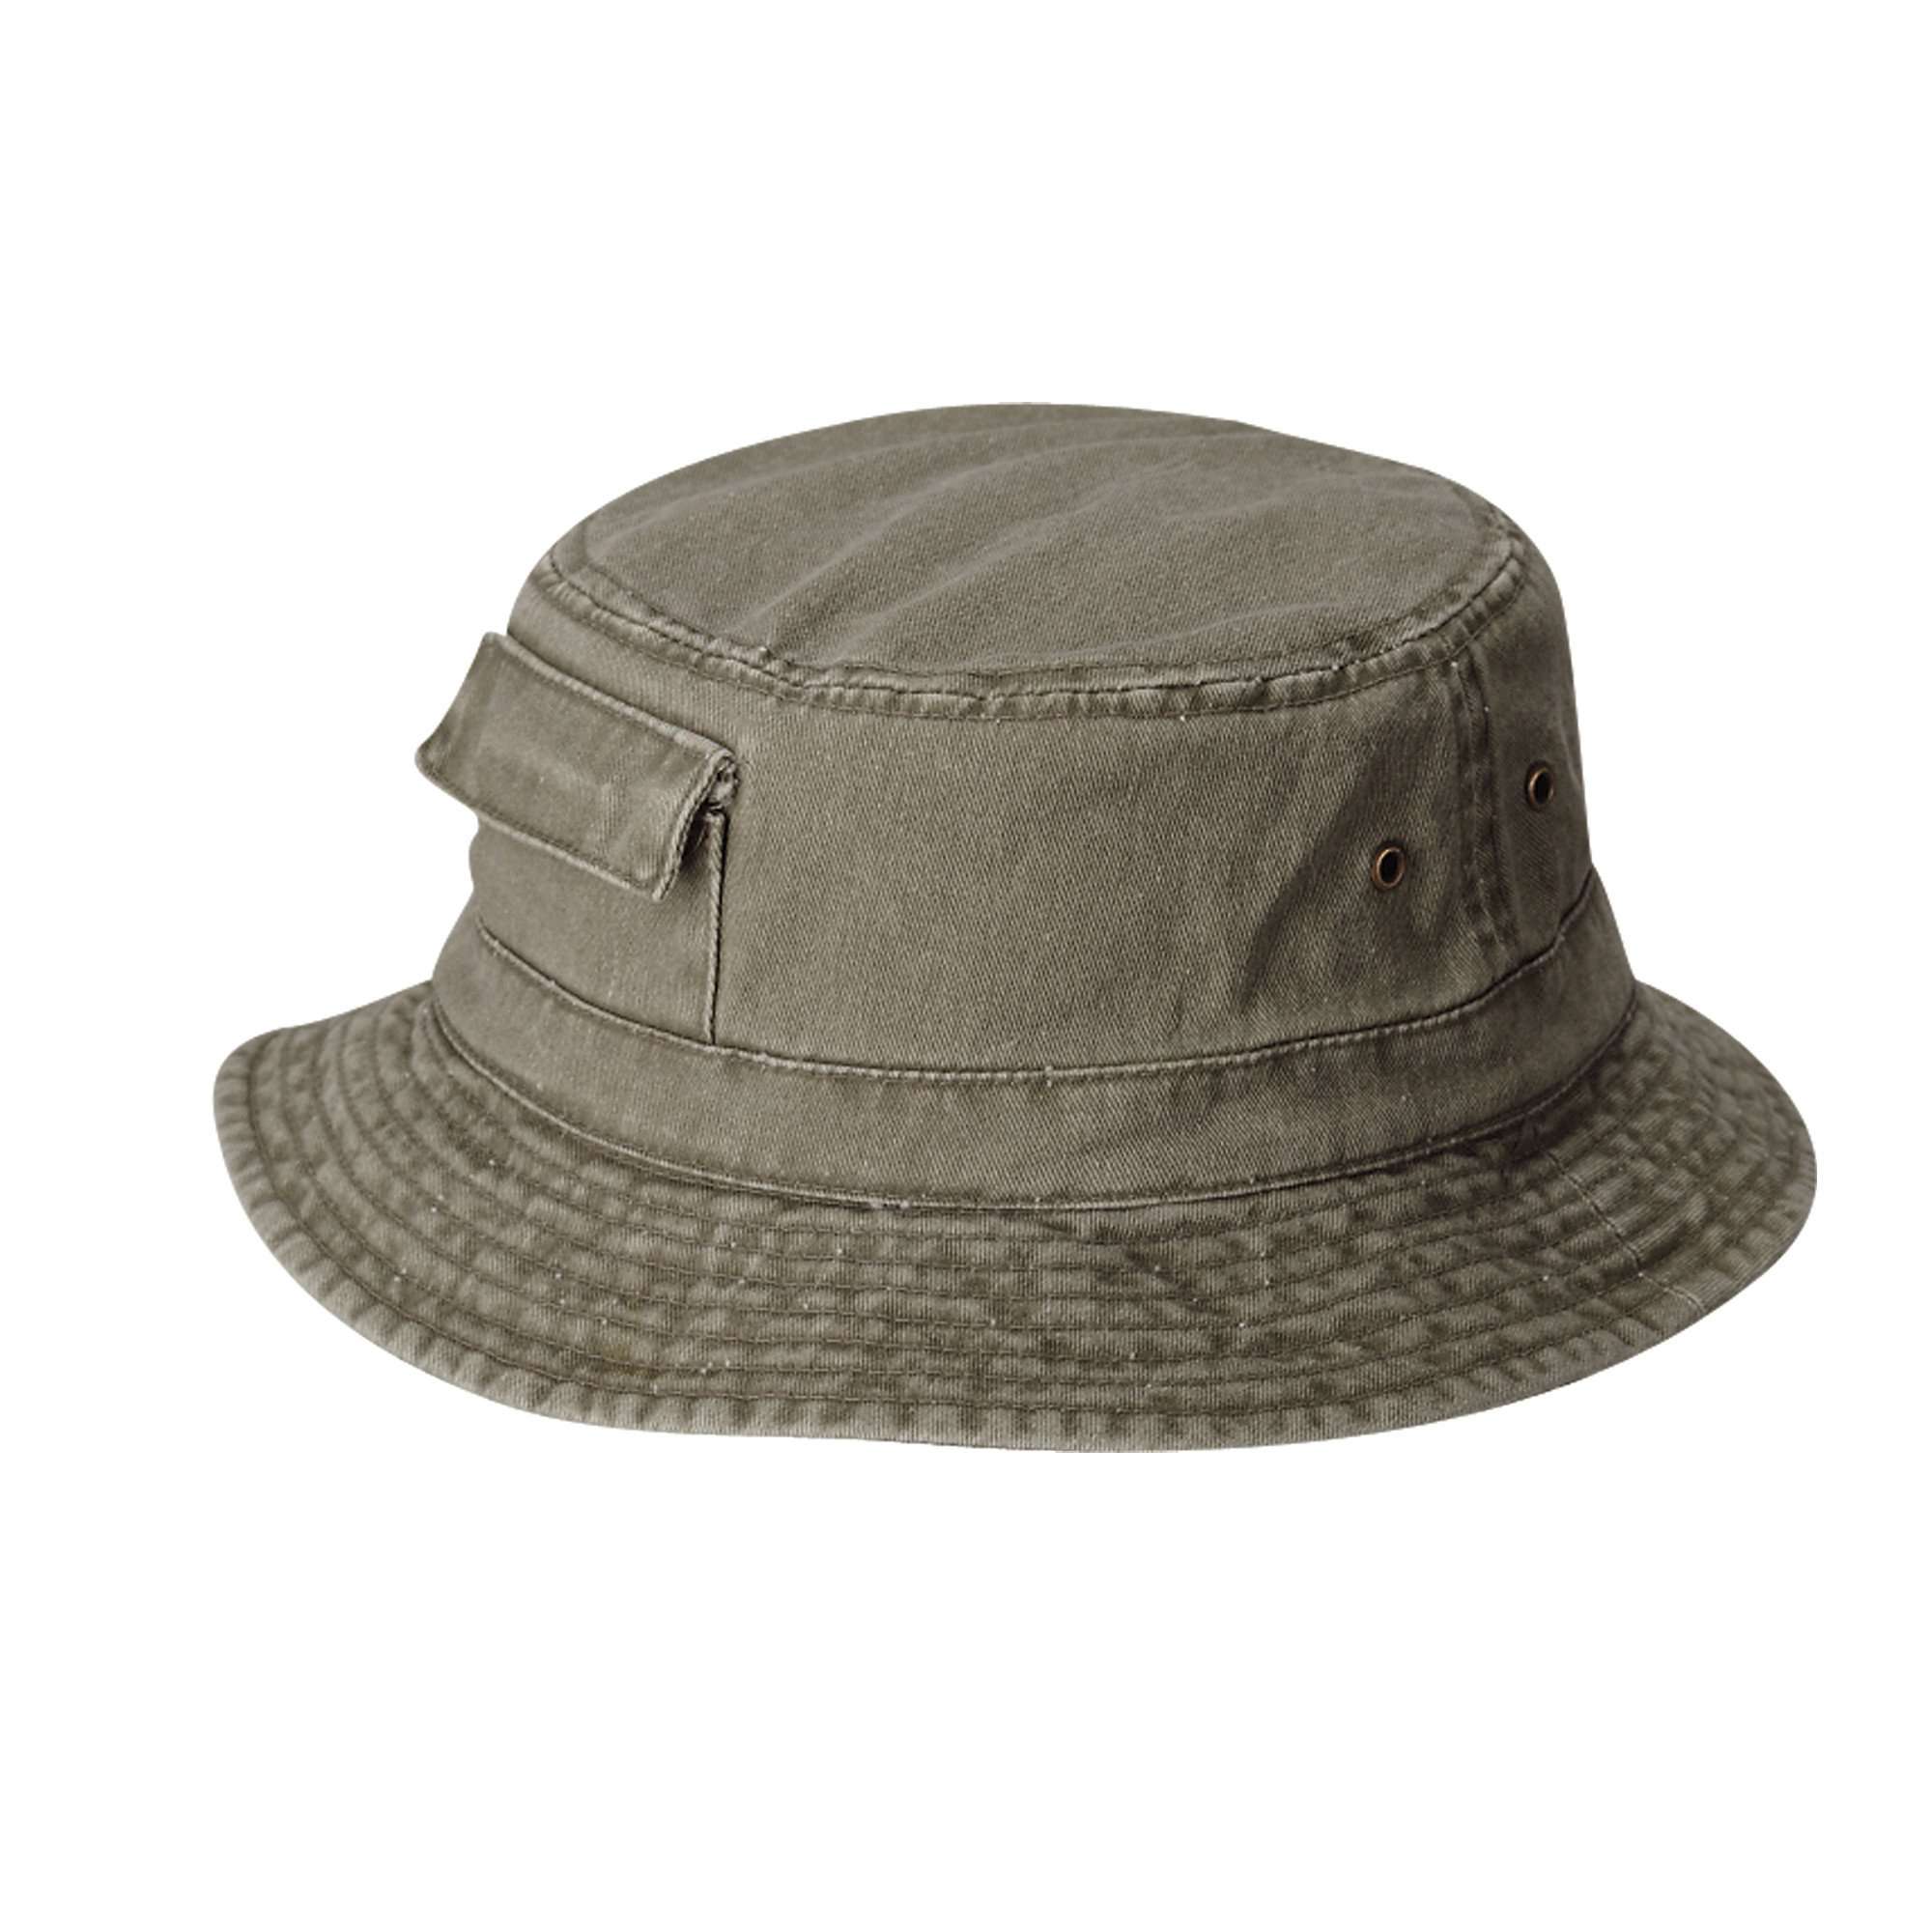 DPC Dyed Twill Bucket Hat with Pocket Stone / S/M